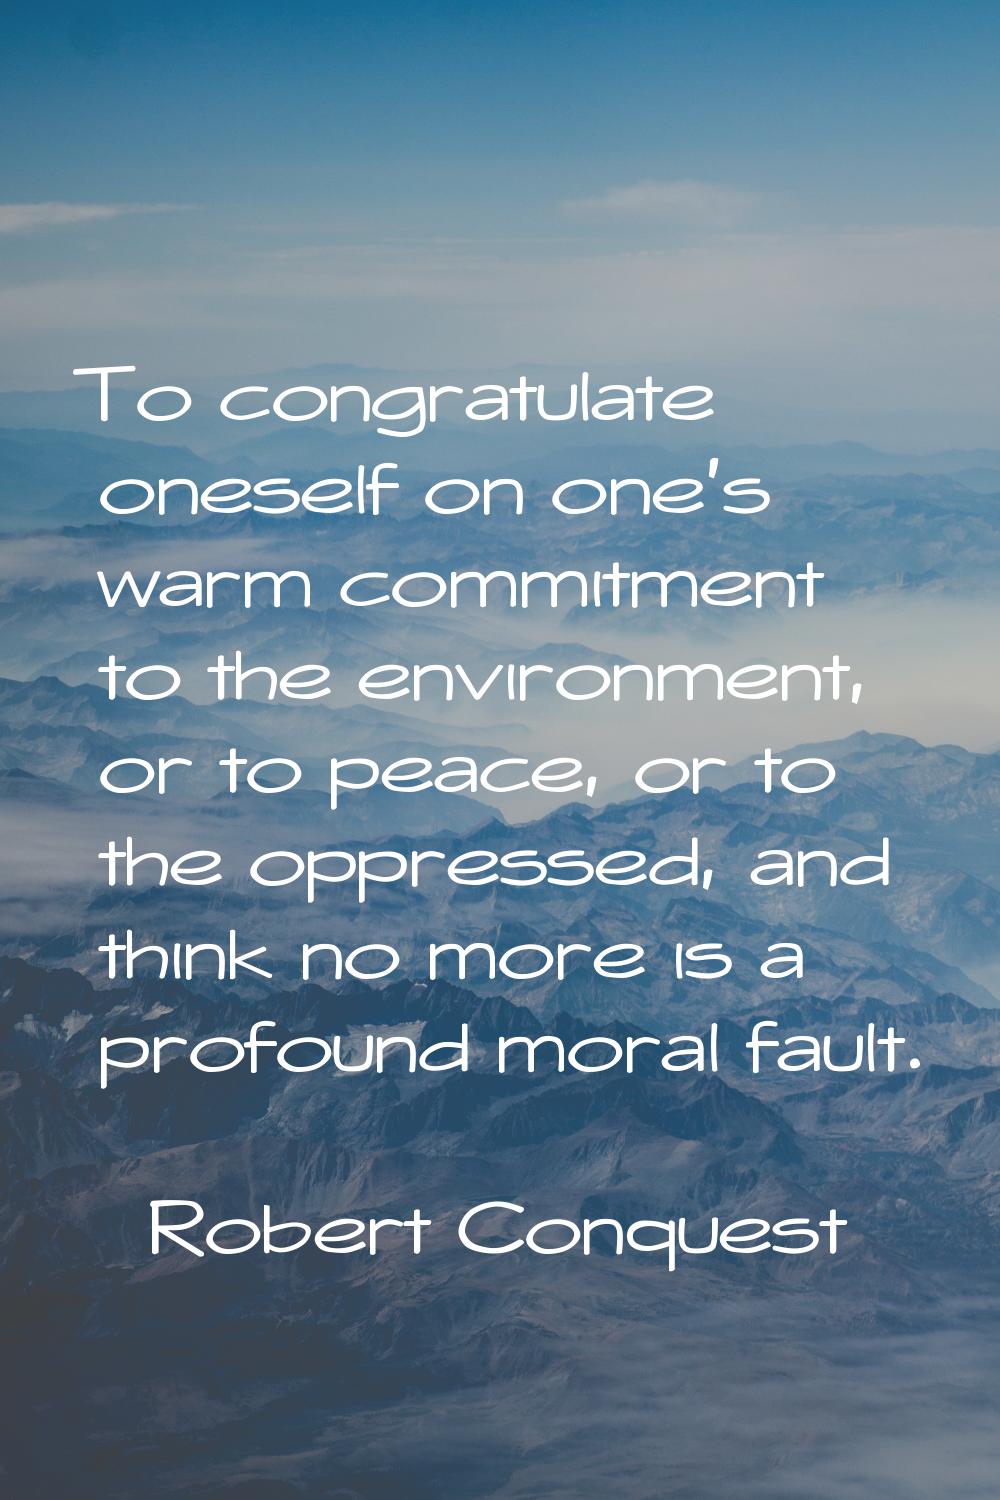 To congratulate oneself on one's warm commitment to the environment, or to peace, or to the oppress